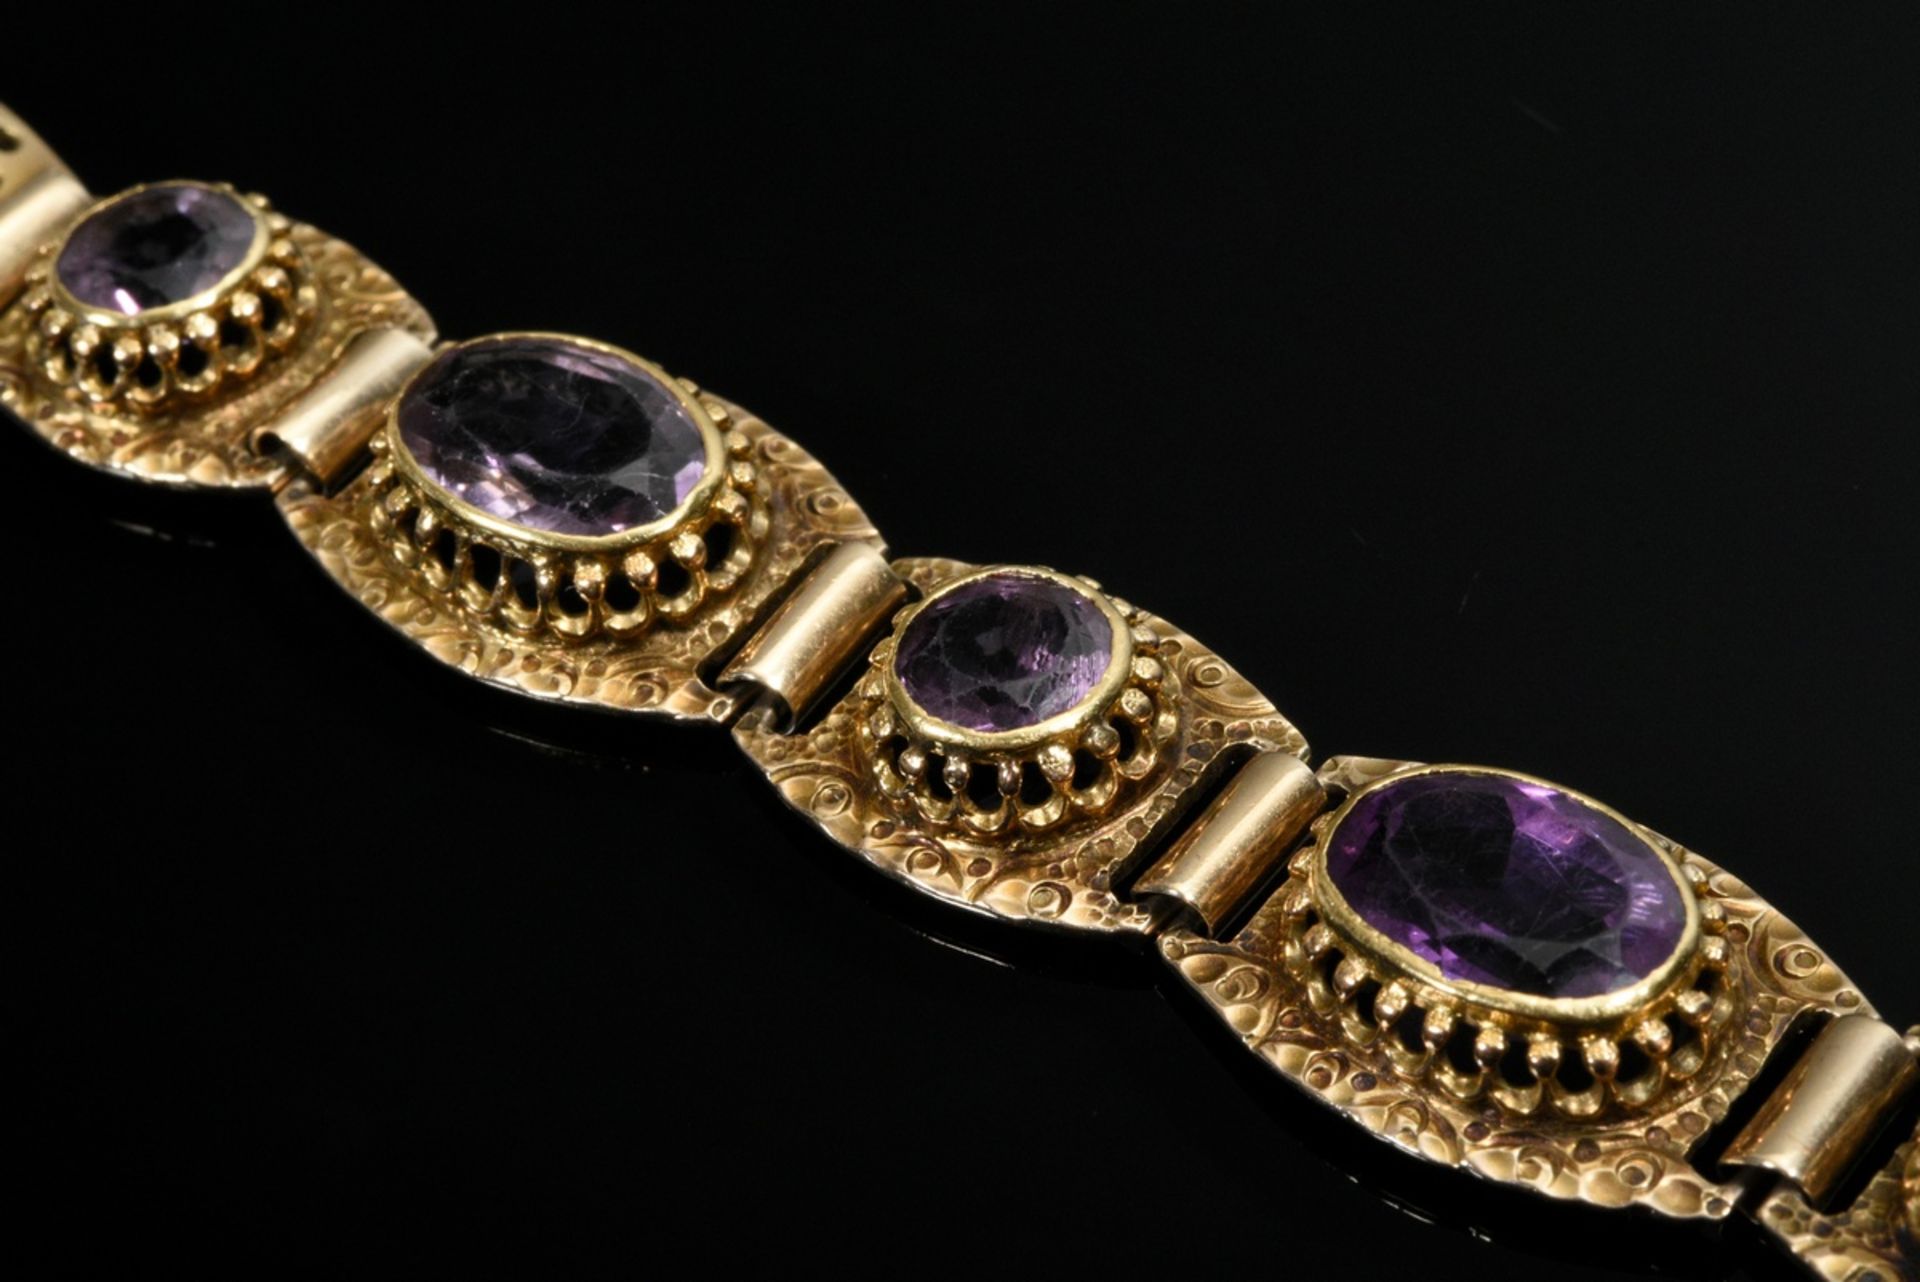 Midcentury yellow gold 585 bracelet with 5 oval amethysts on ornamentally cut elements, 20g, l. 17. - Image 2 of 3